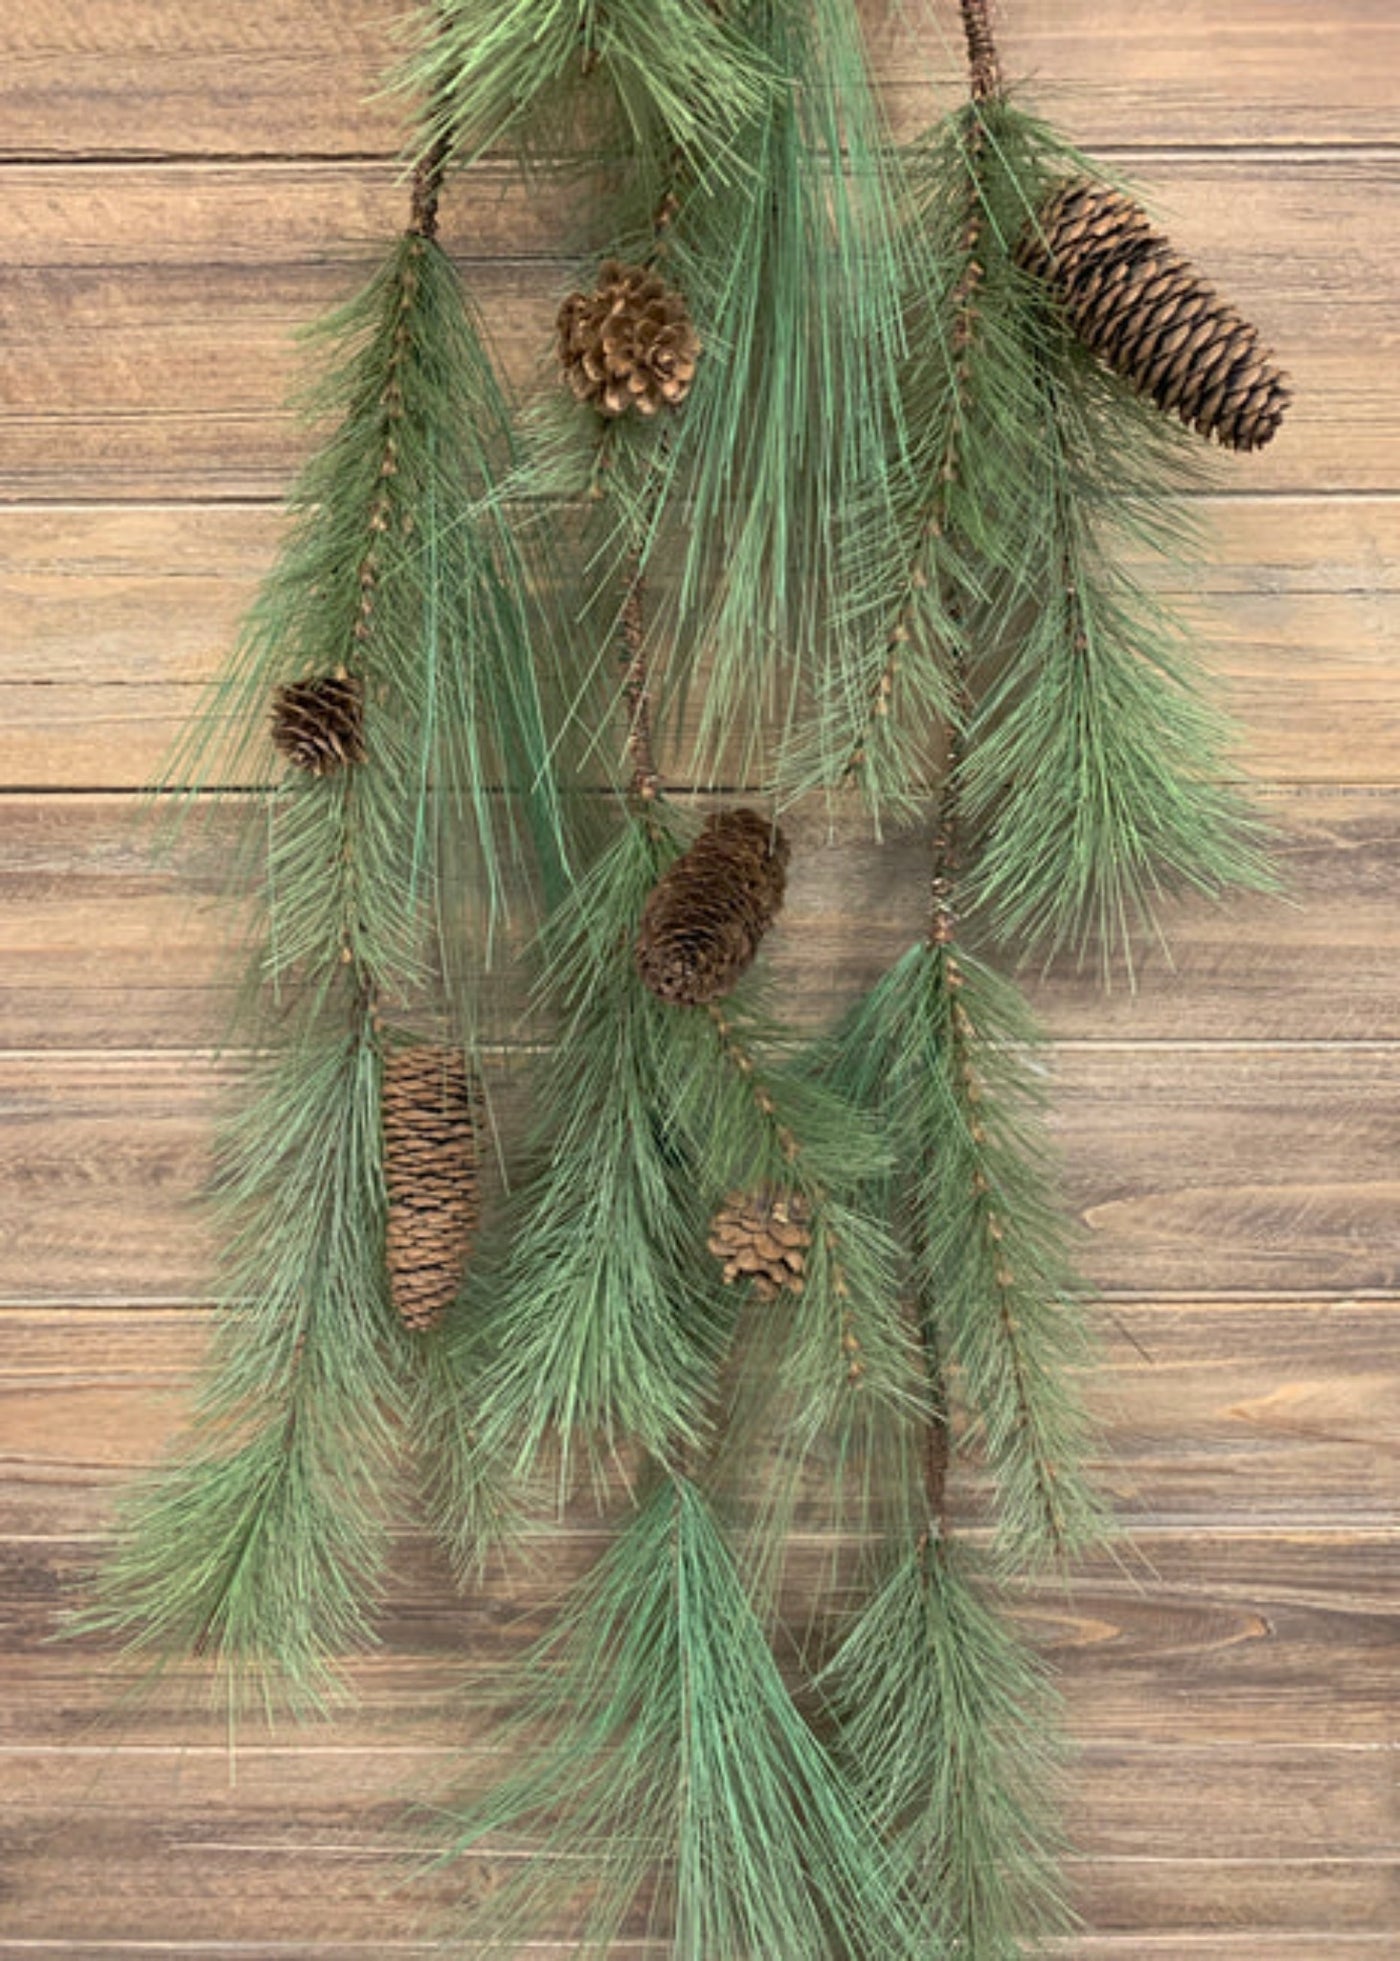 Long Needle Pine Garland 48" - with pinecones